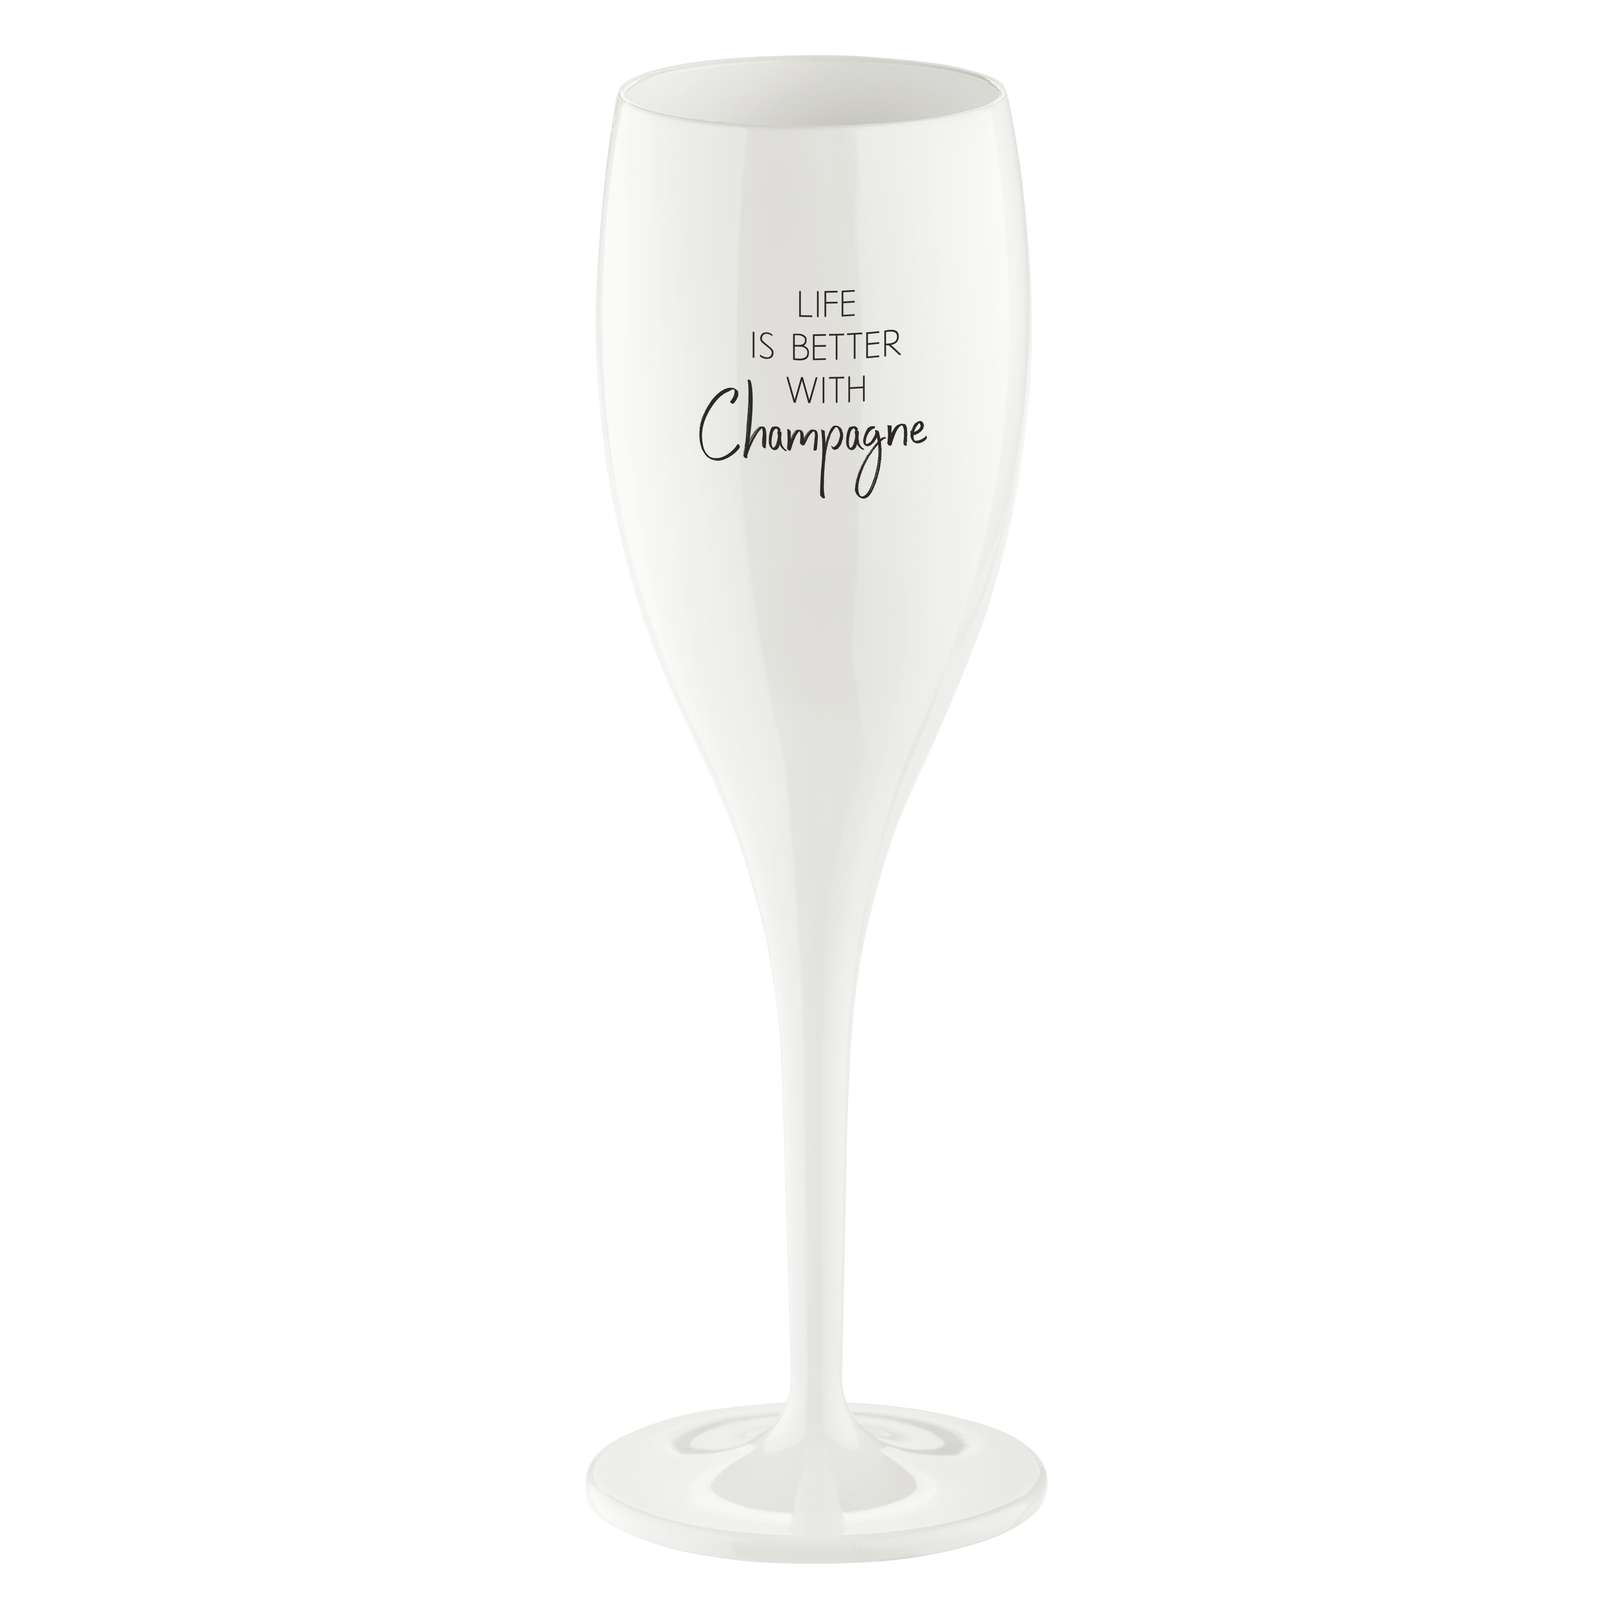 Champagneglas 100ml 6-pack Life Is Better With Champagne från Koziol